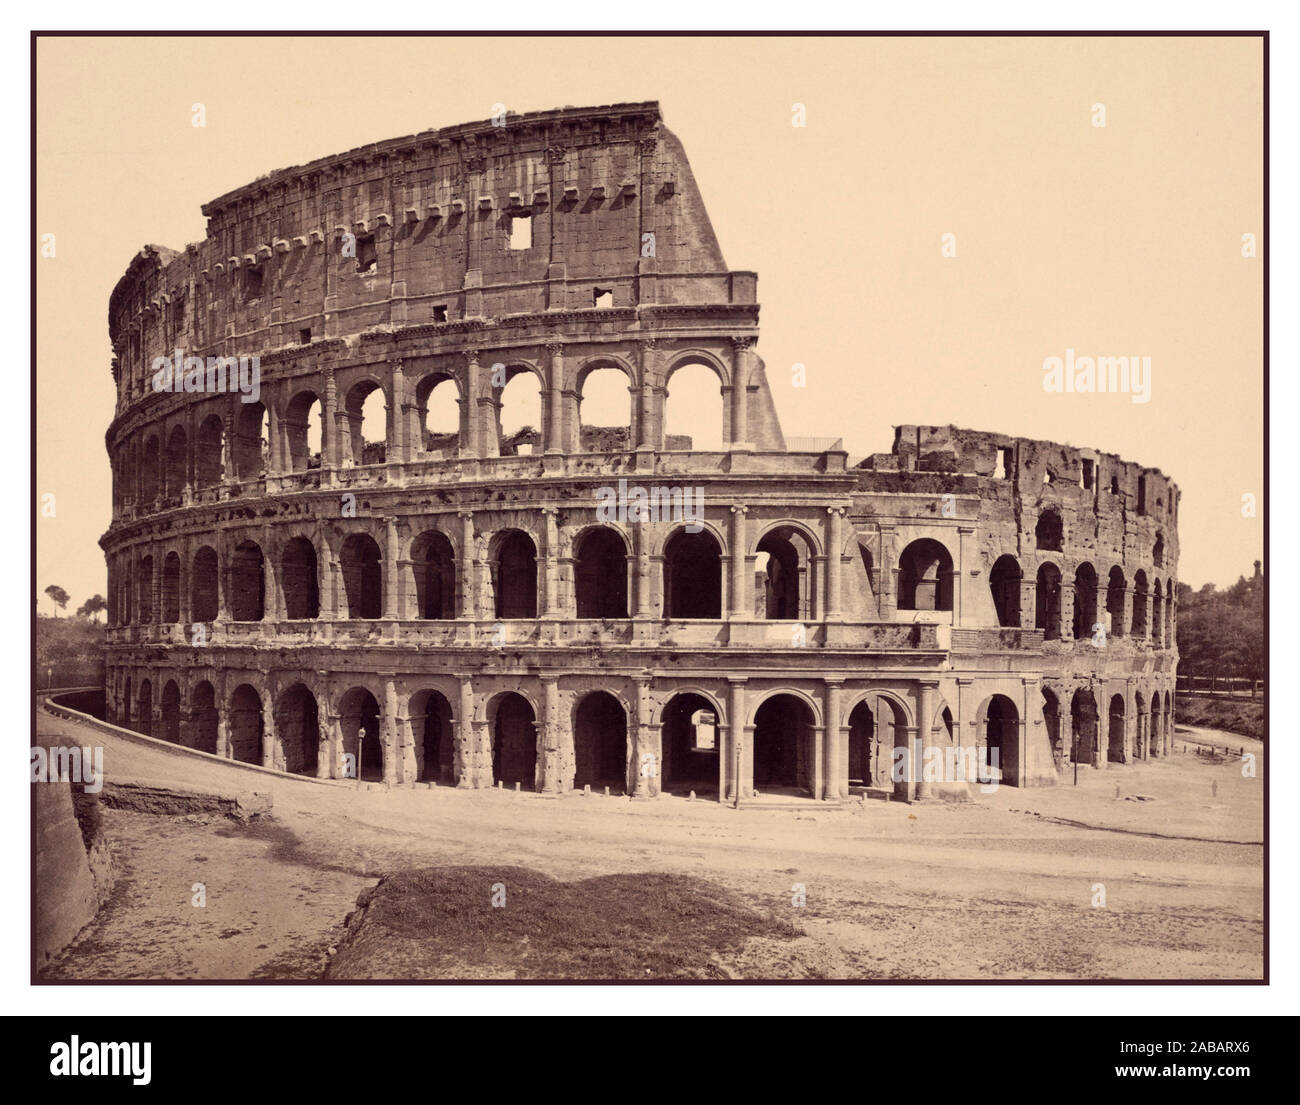 The Colosseum Rome Italy c1870's Vintage B&W image 19th C photographed by Fratelli Alinari (Italian photography studio and publisher, 1854-1920) Colosseum built around 75-80 AD Rome, Roma, Lazio, Italy Roman (ancient Italian style) Colosseum, Rome, Italy Stock Photo